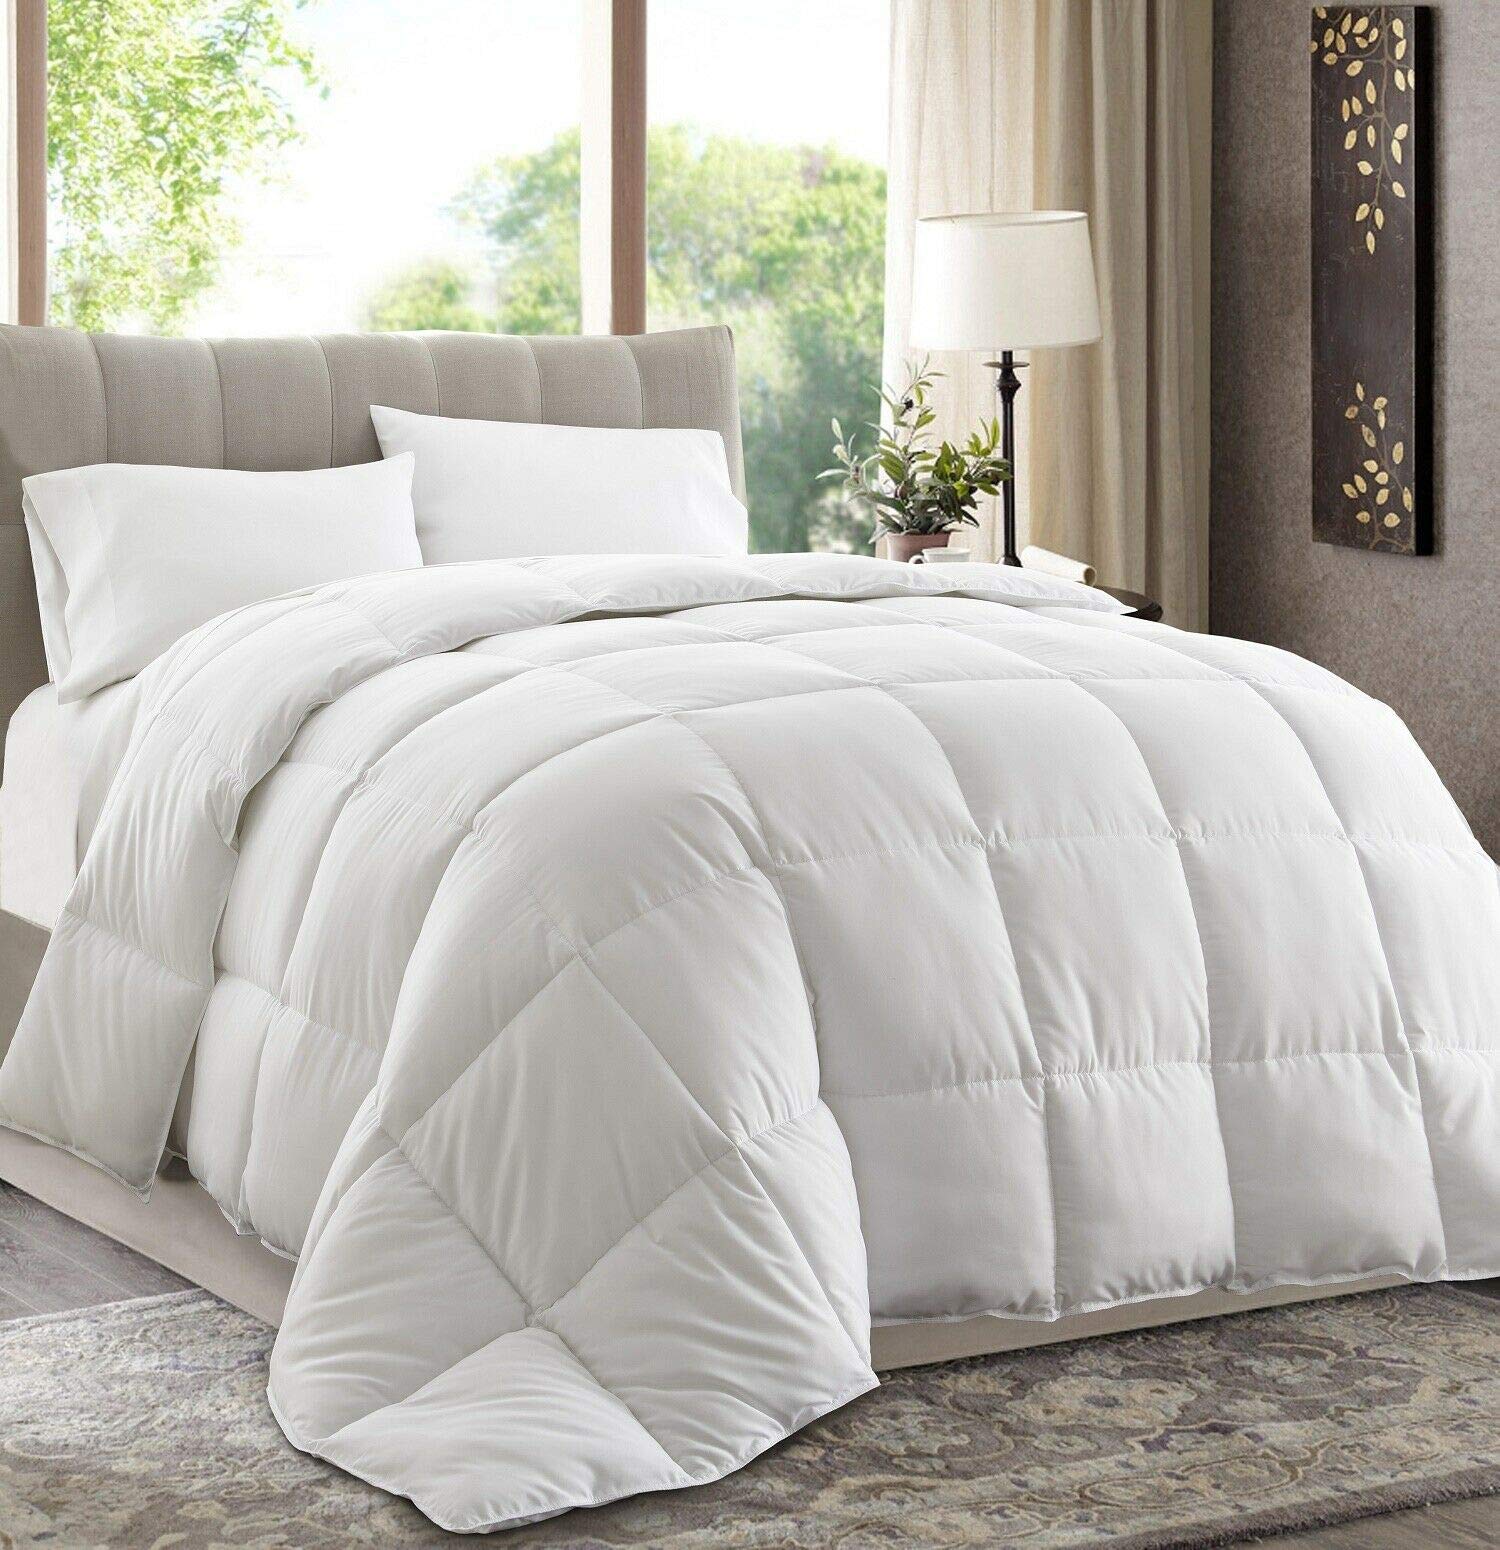 Book Cover Chezmoi Collection All Season Down Alternative Comforter - Plush Microfiber Fill - Box Stitch Quilted - Duvet Insert with Corner Tabs (King, White) King White